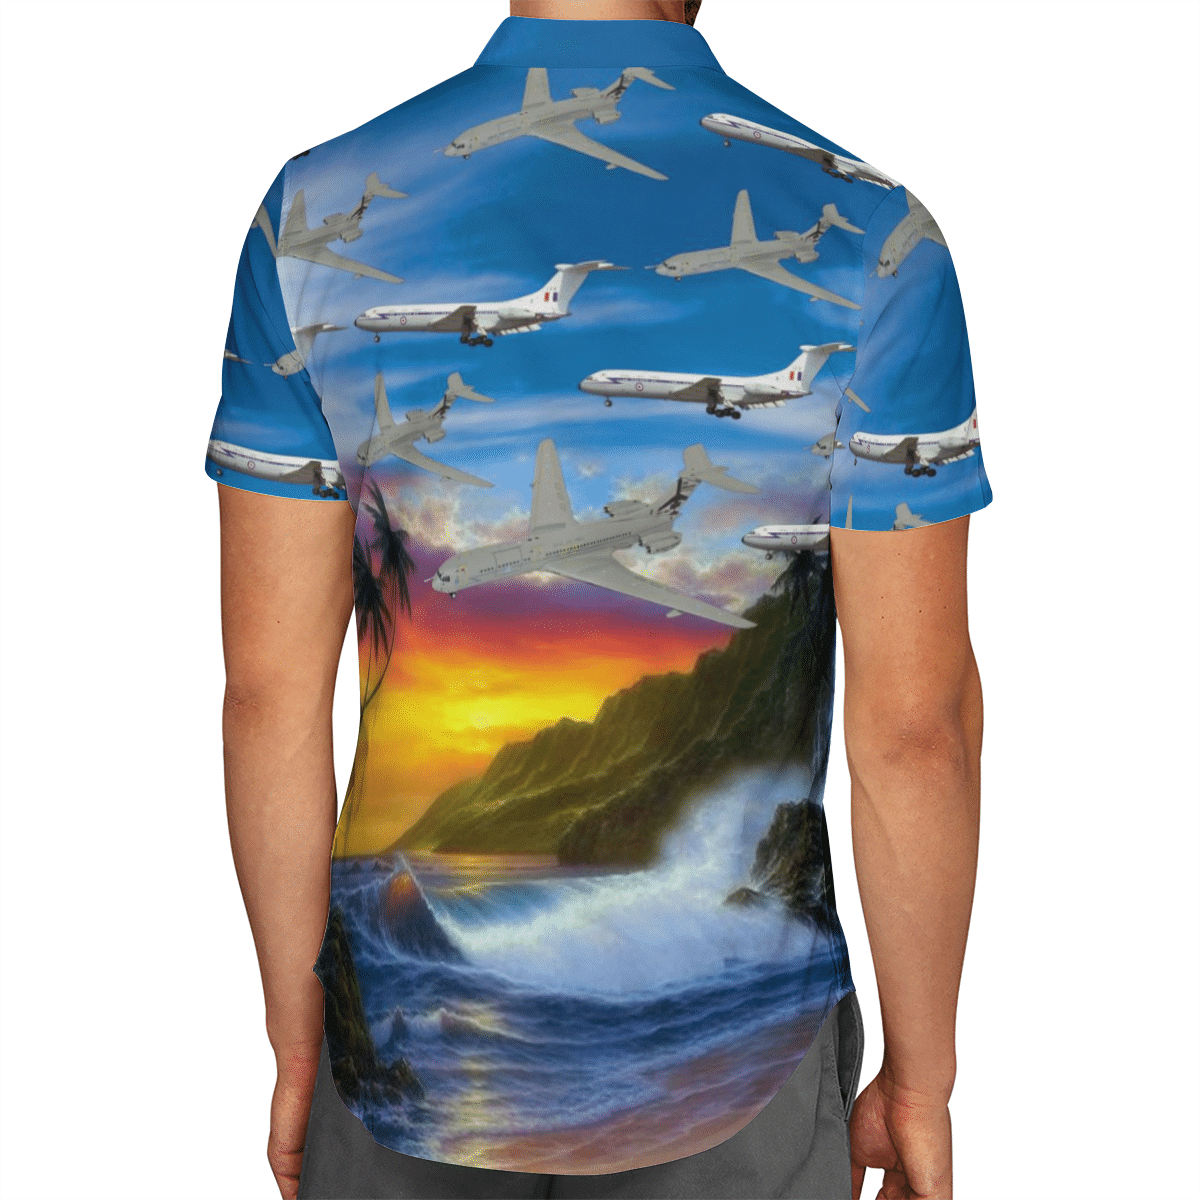 Going to the beach with a quality shirt 183